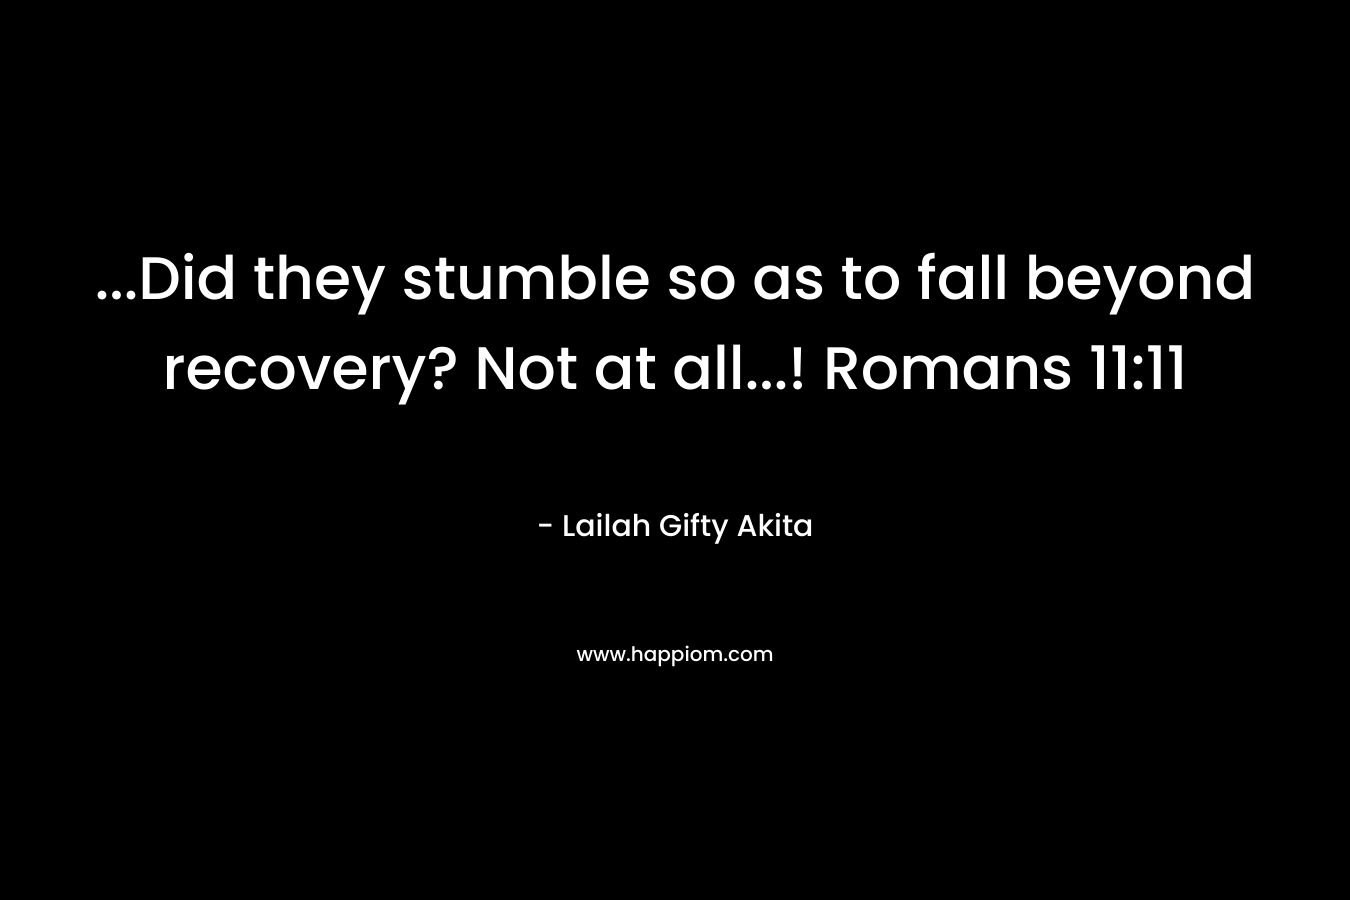 ...Did they stumble so as to fall beyond recovery? Not at all...! Romans 11:11